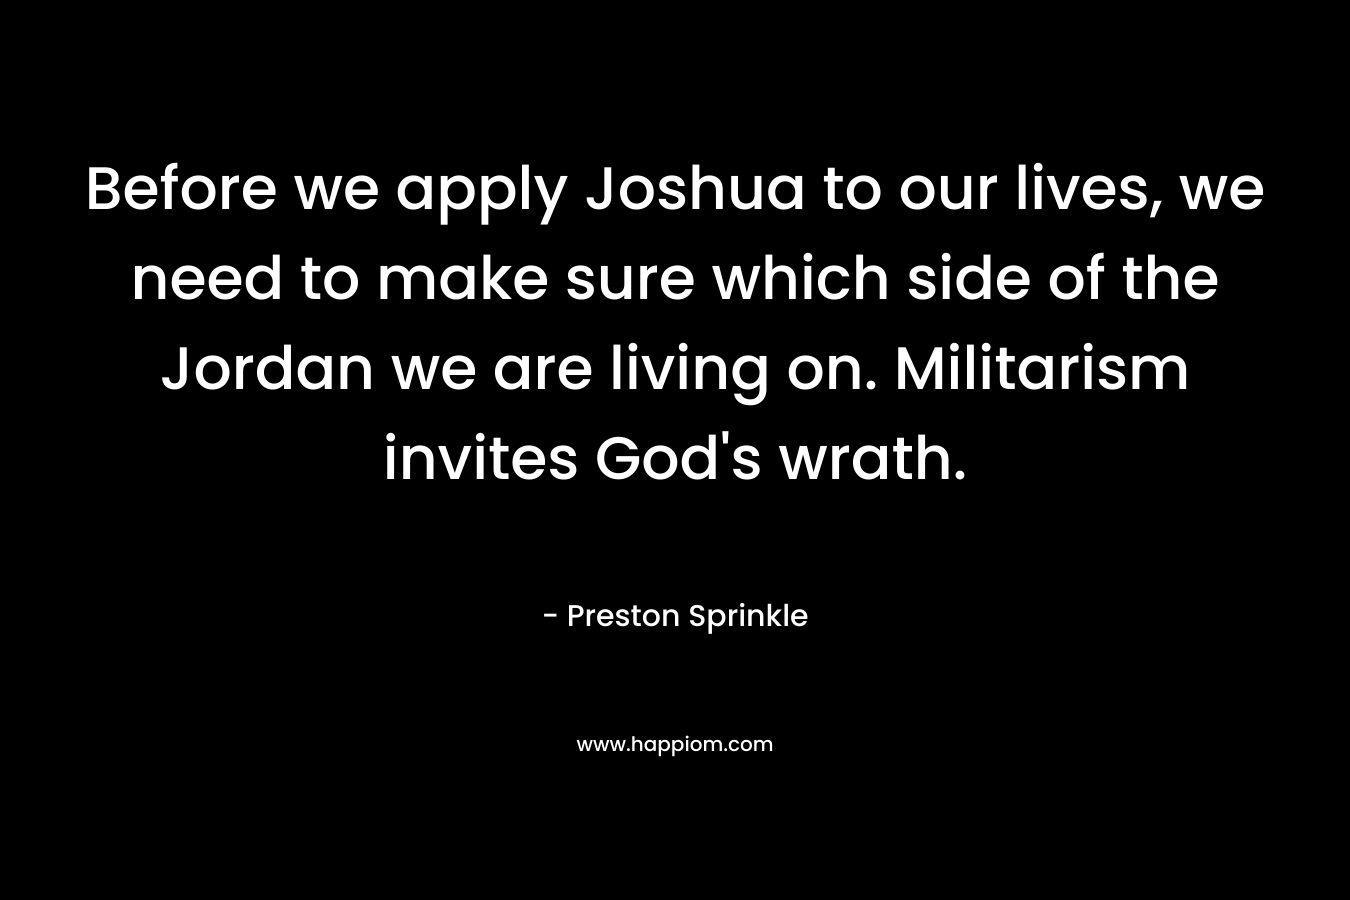 Before we apply Joshua to our lives, we need to make sure which side of the Jordan we are living on. Militarism invites God’s wrath. – Preston Sprinkle